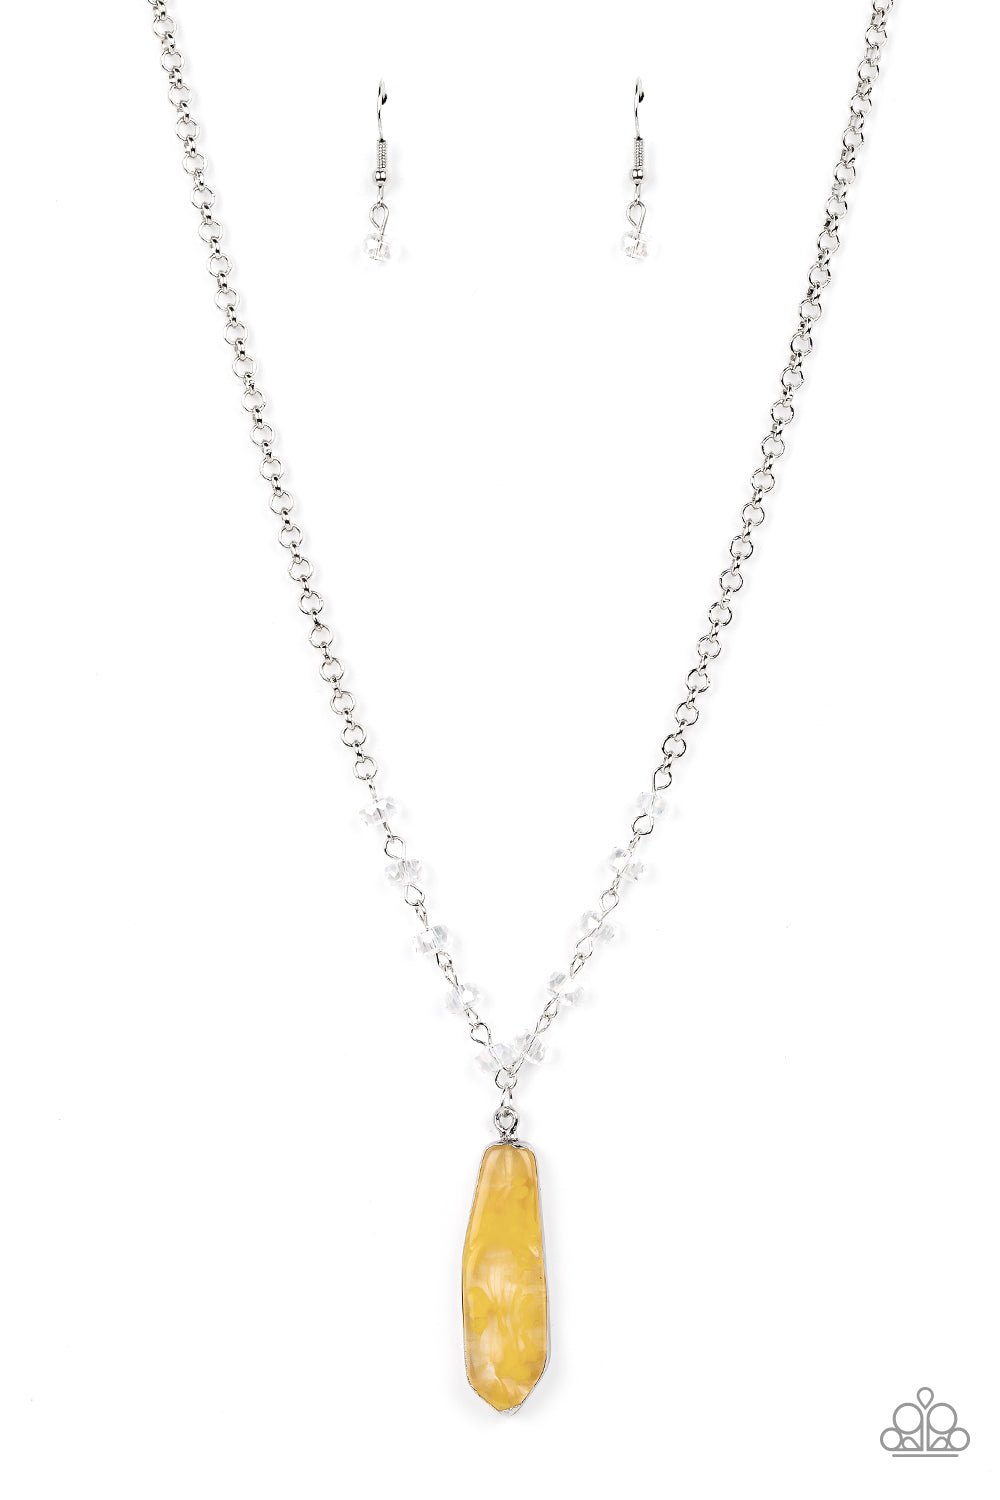 Magical Remedy - Yellow Necklace - Paparazzi Accessories